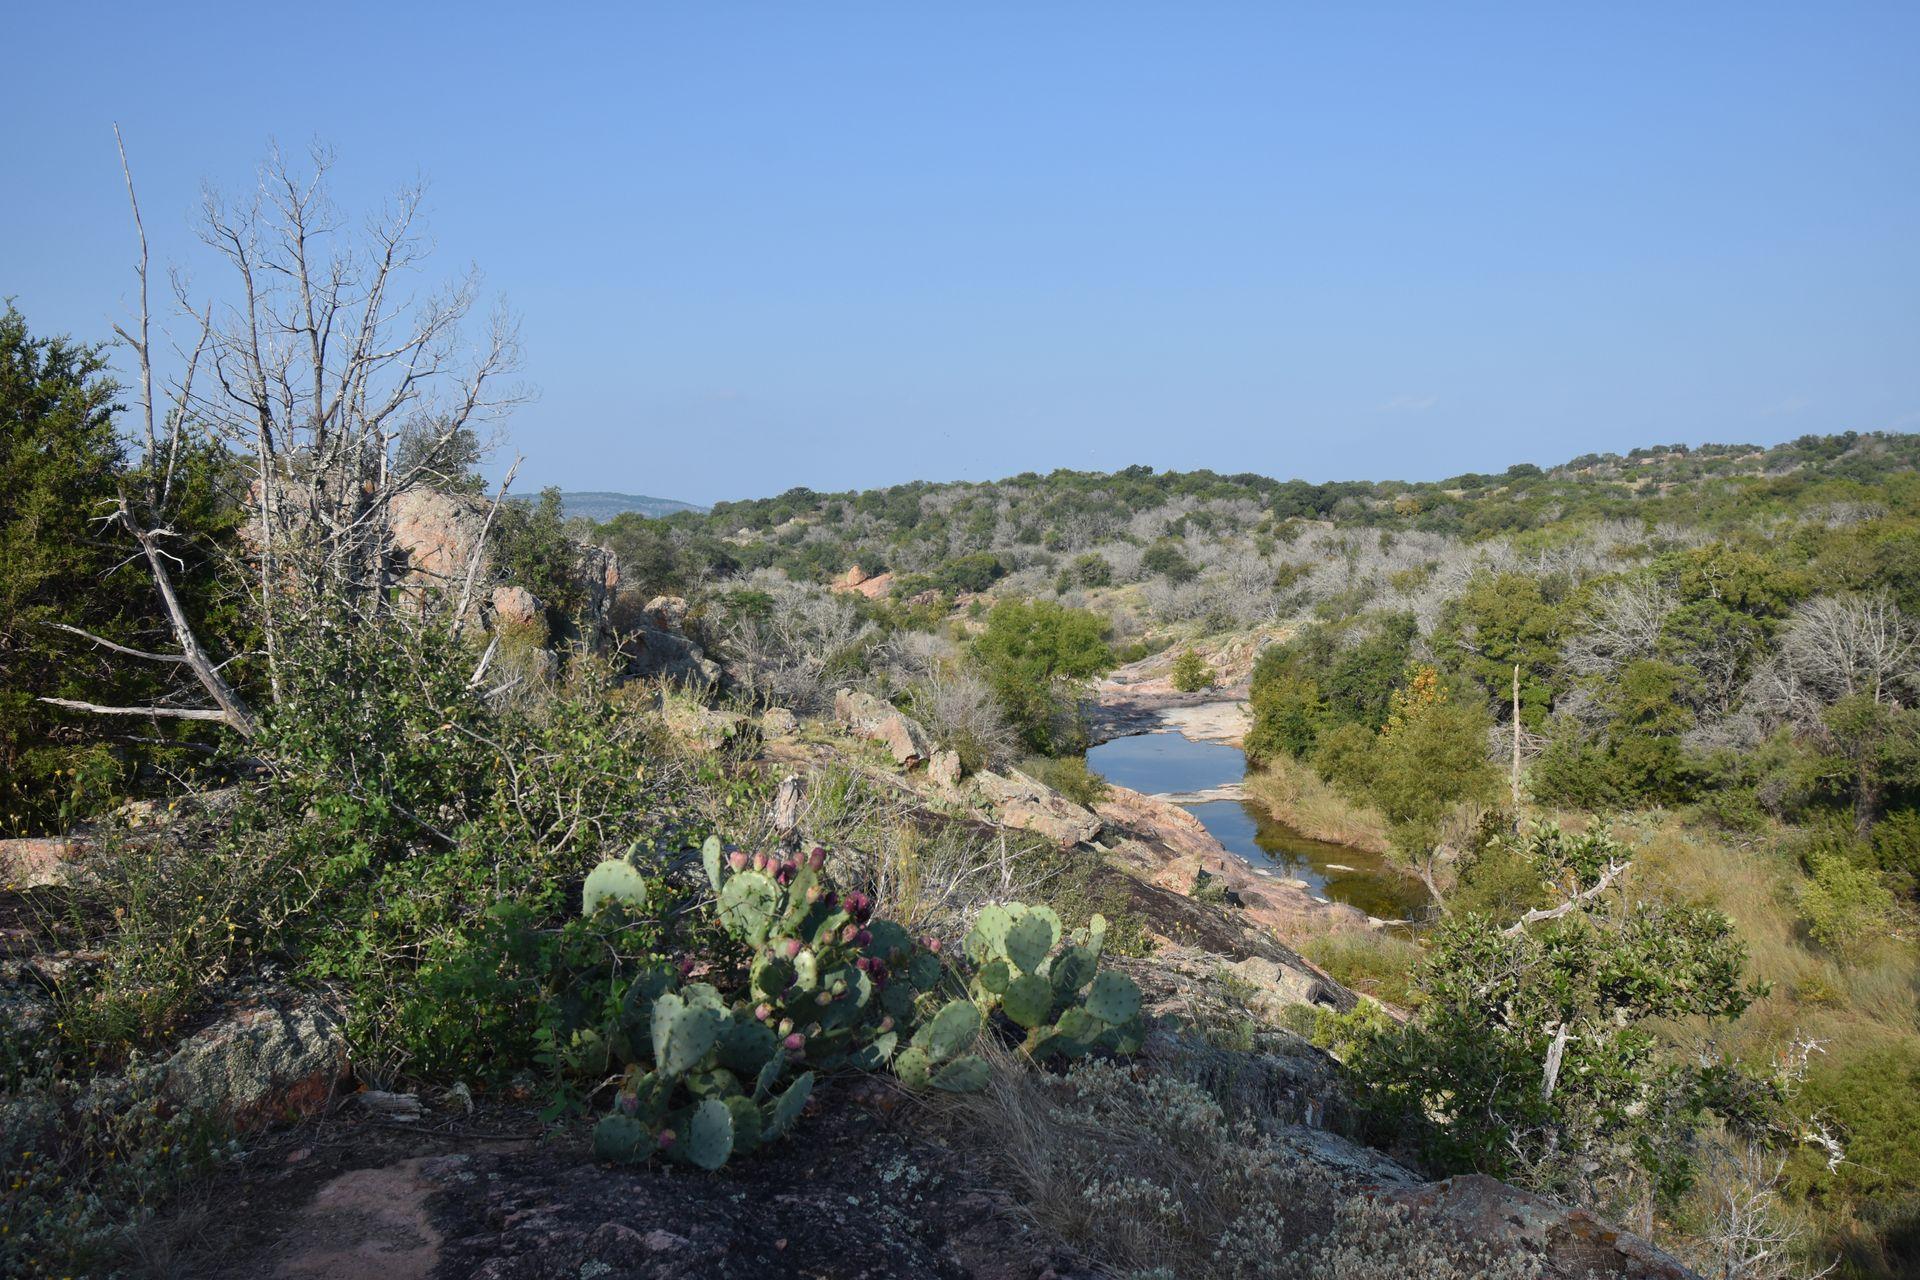 A view of desert landscape that looks down at a couple pools of water. There are some prickly pear cacti with purple flowers in the foreground.